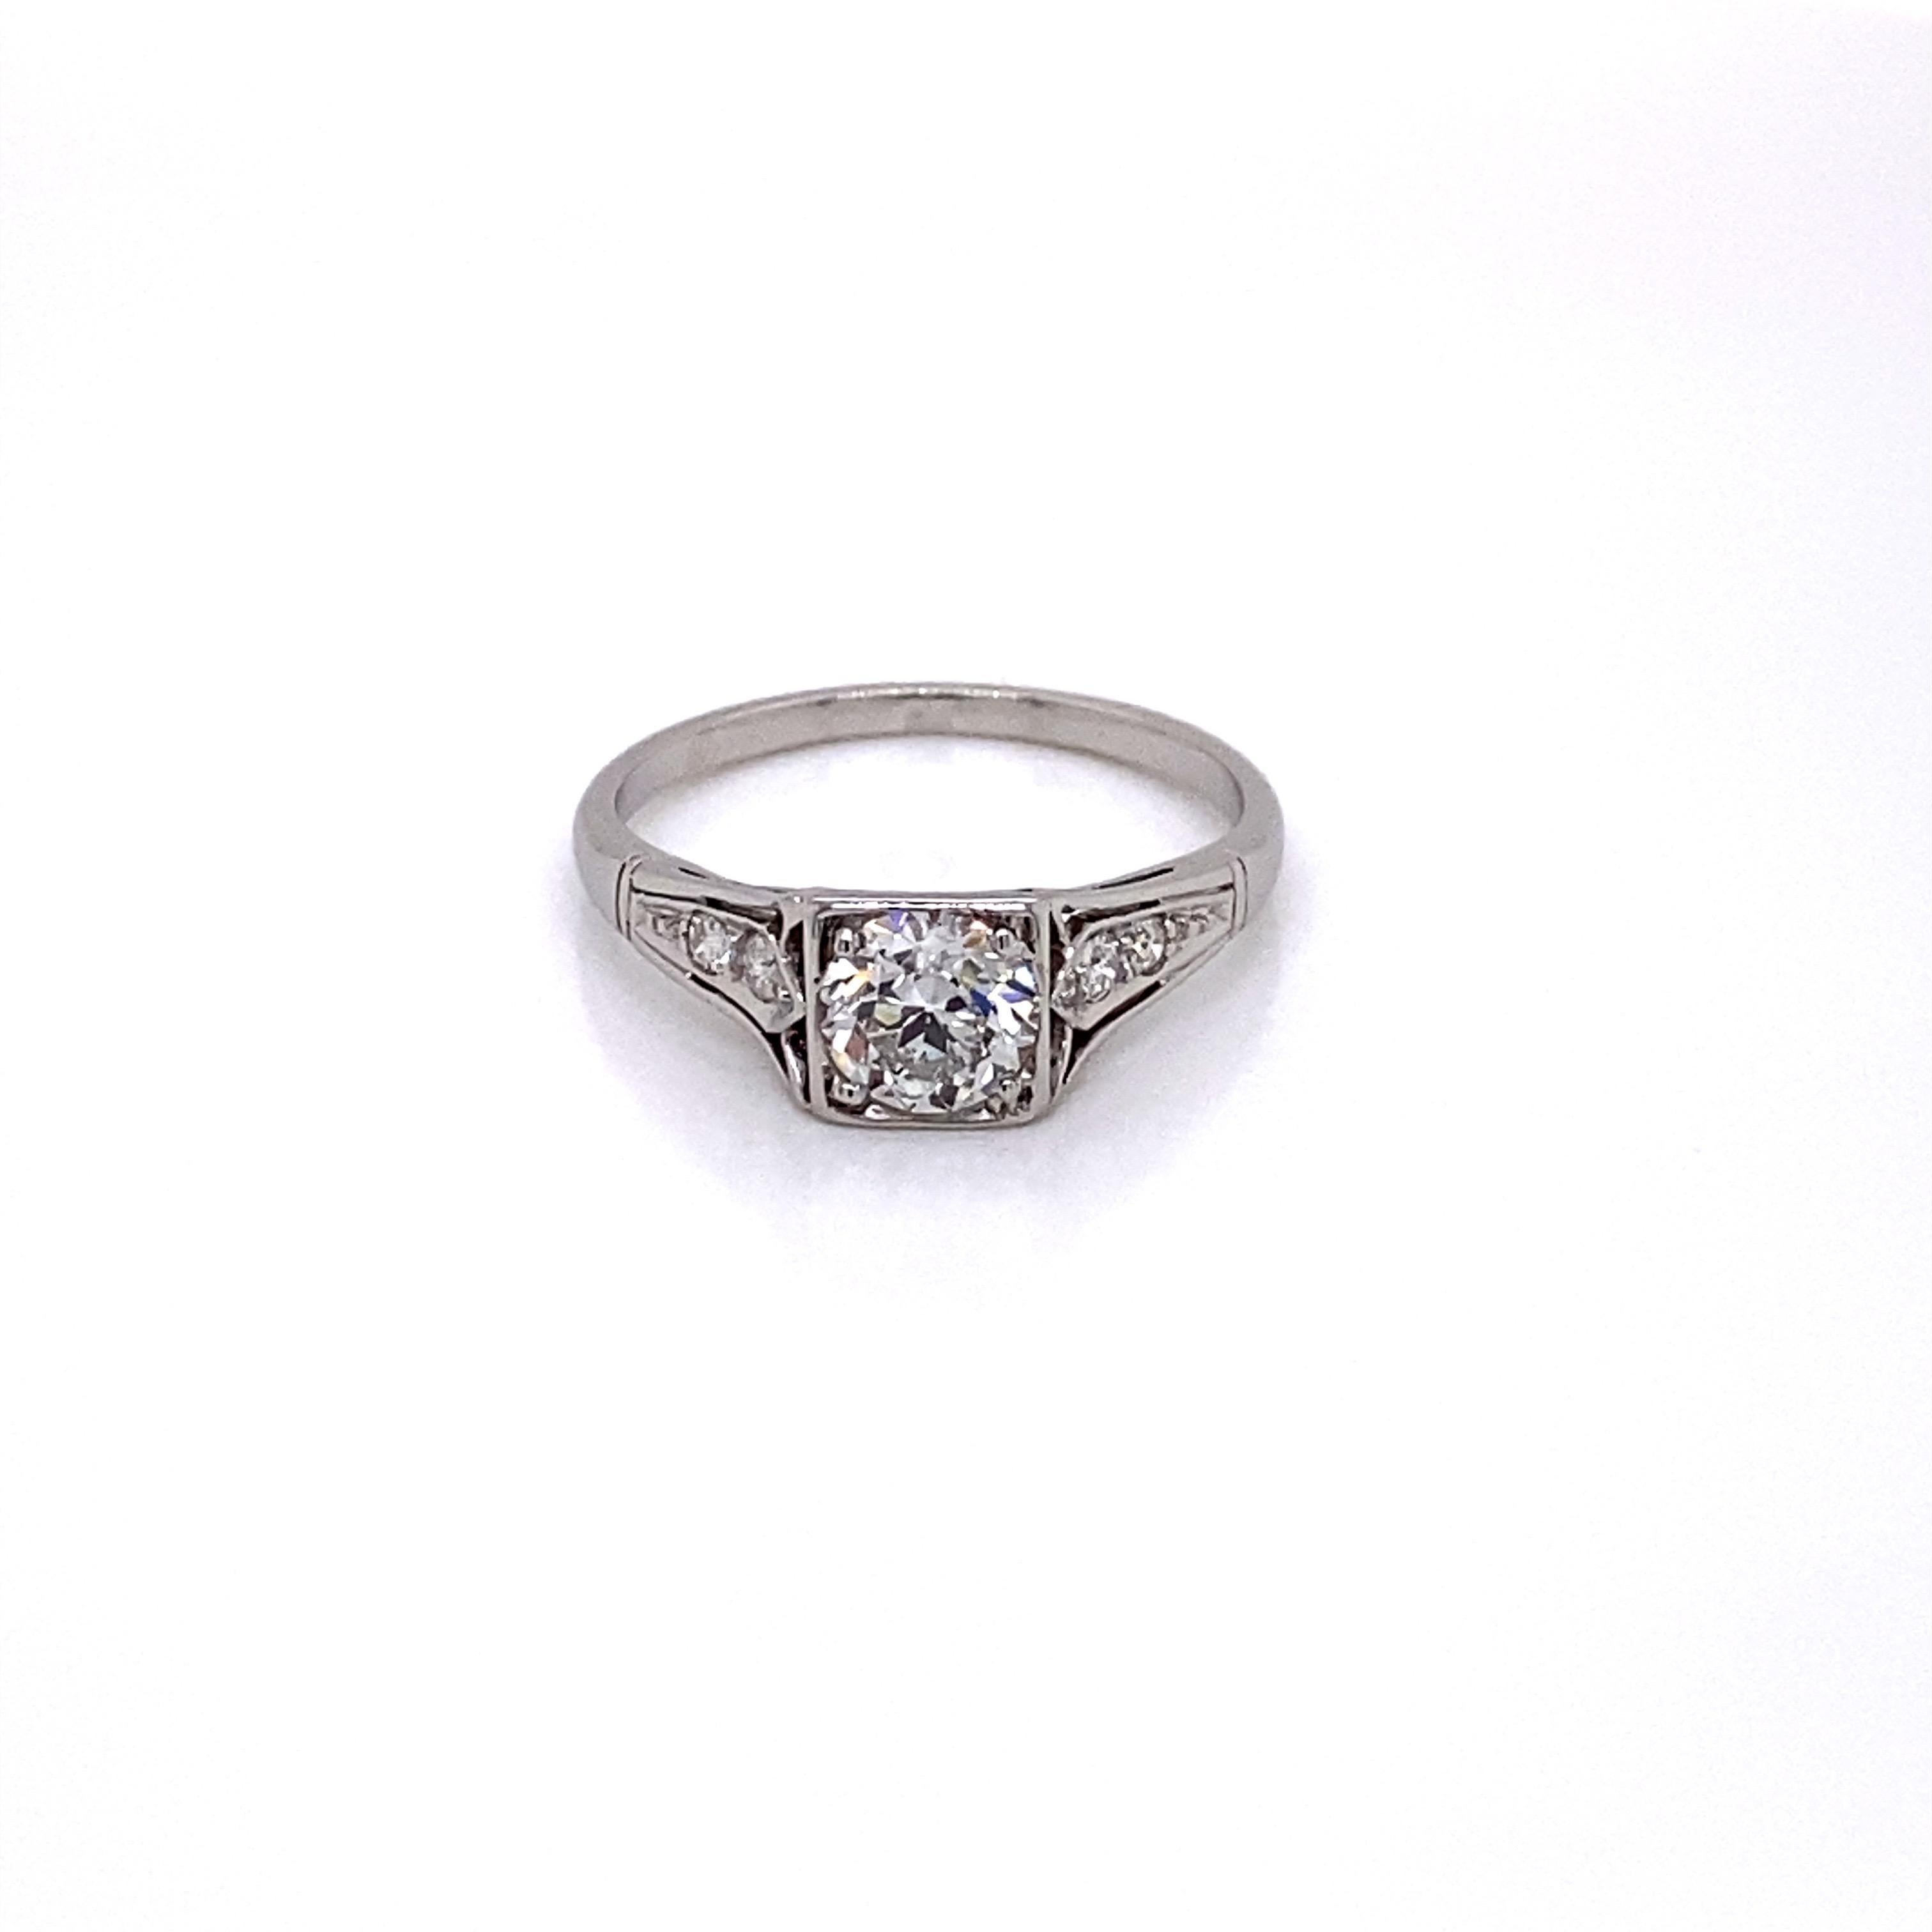 Vintage 1930s Art Deco Diamond Ring - The center European Cut diamond weighs .70ct and is H color and VS2 clarity. The diamond sits low in a platinum Art Deco square setting with beautiful heart shape and circle filigree workmanship in the gallery.